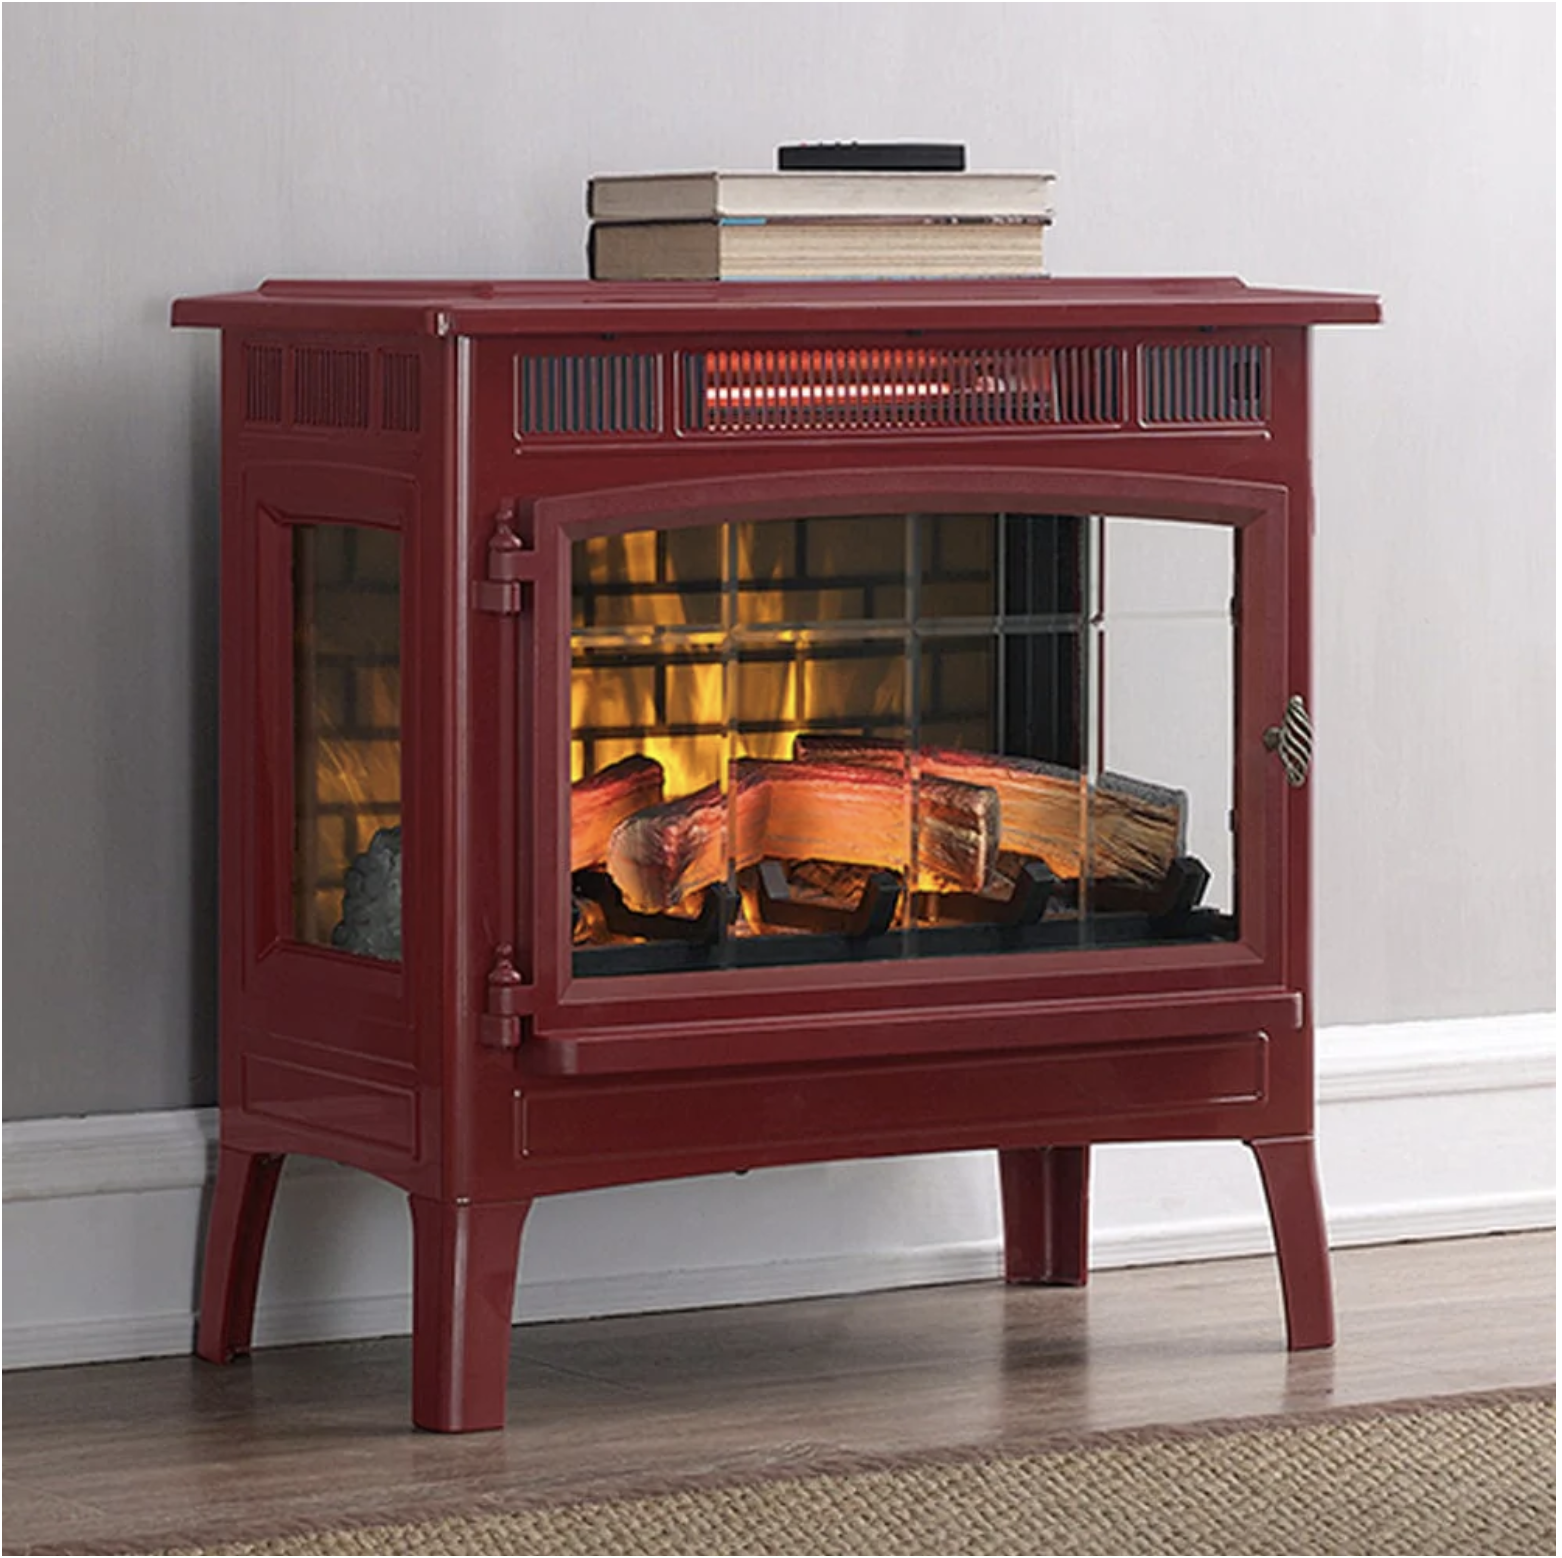 Wood Stove-style Electric Heater